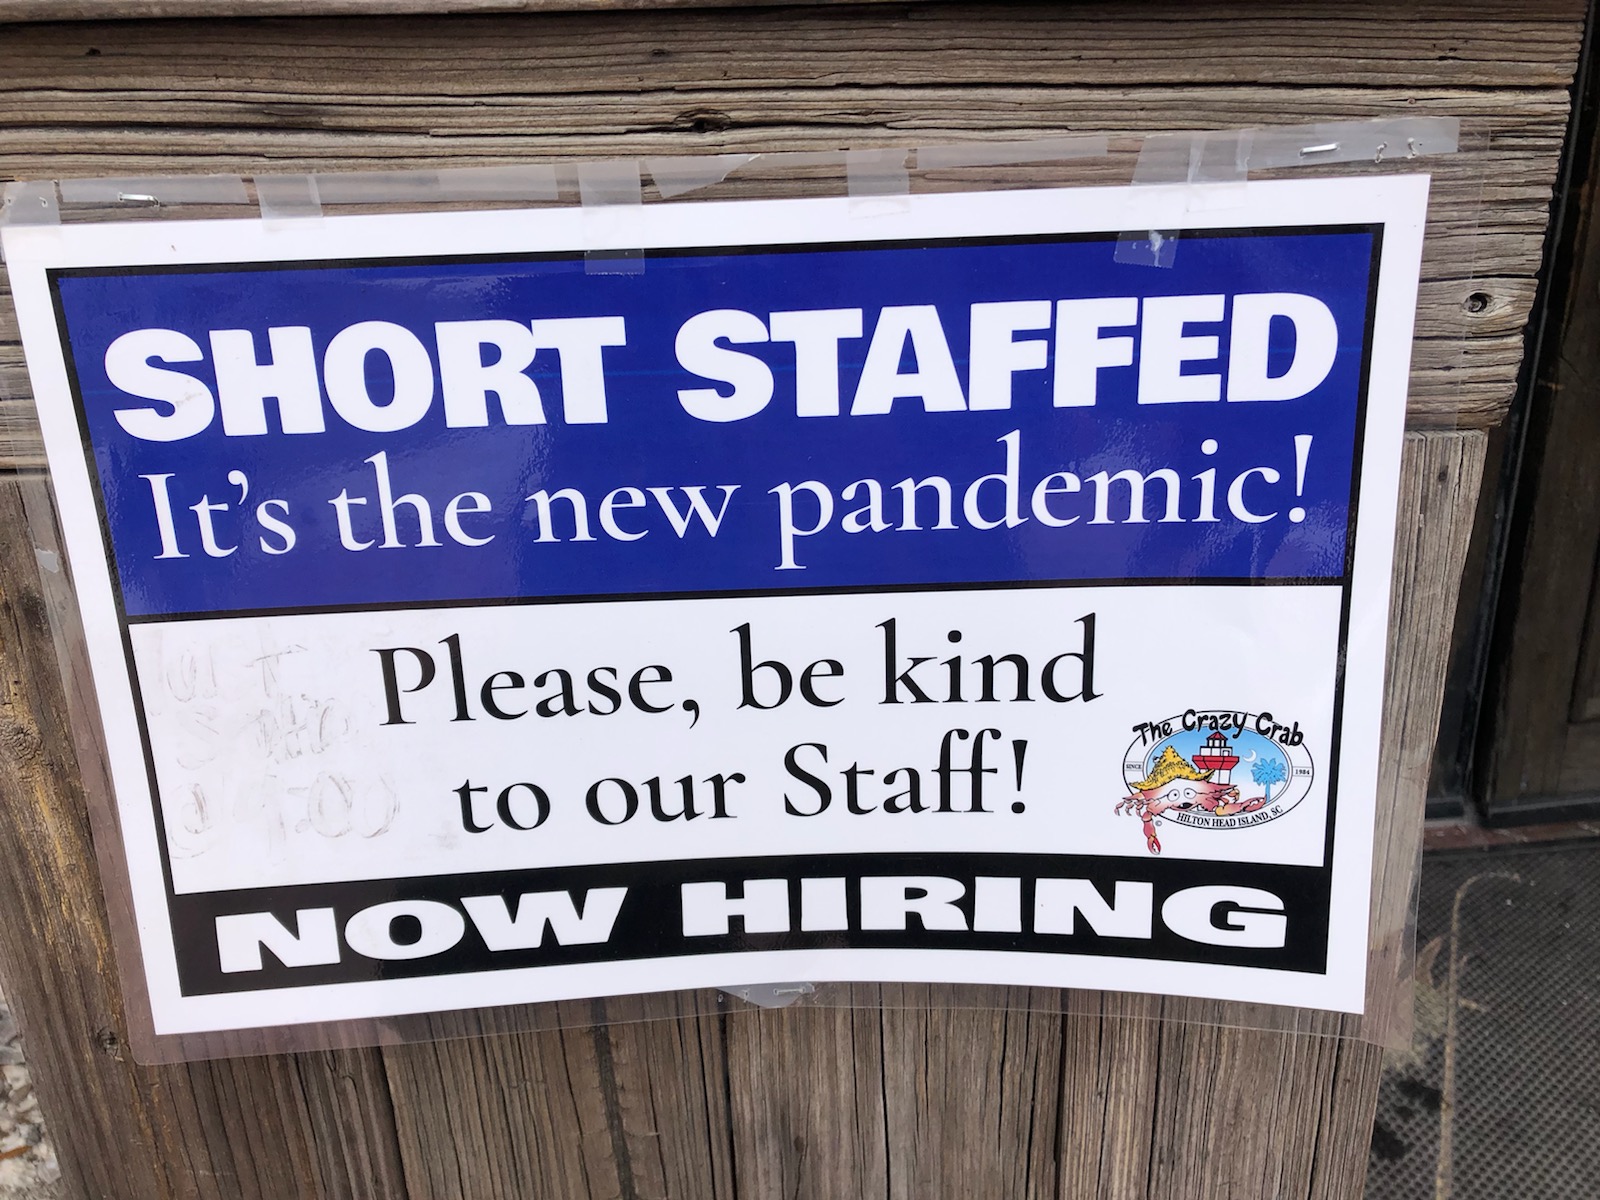 Short Staffed is the new Pandemic